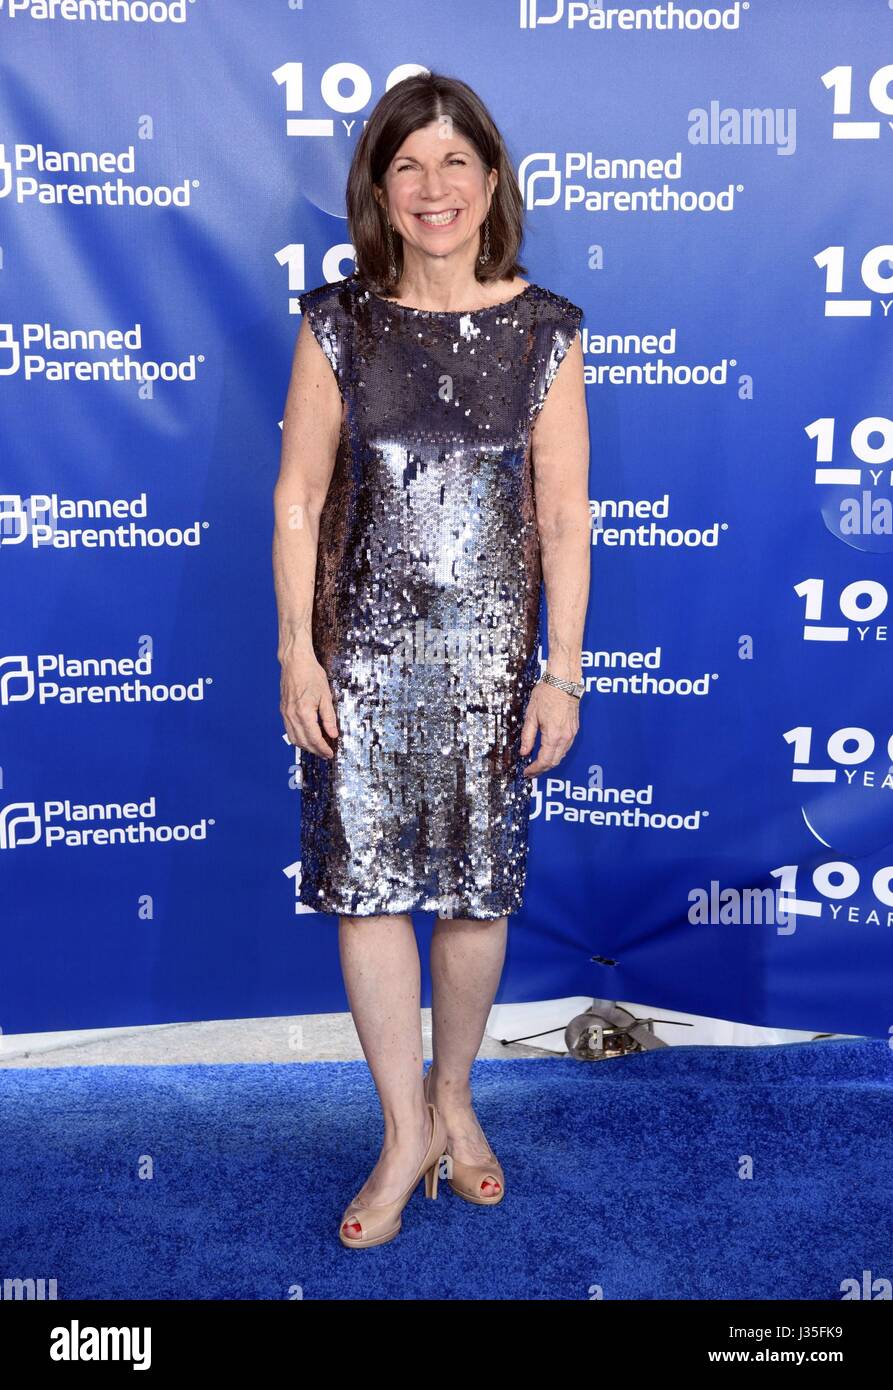 New York, NY, USA. 2nd May, 2017. Anna Quindlen at arrivals for Planned Parenthood 100th Anniversary Gala, Pier 36/South Street, New York, NY May 2, 2017. Credit: Derek Storm/Everett Collection/Alamy Live News Stock Photo